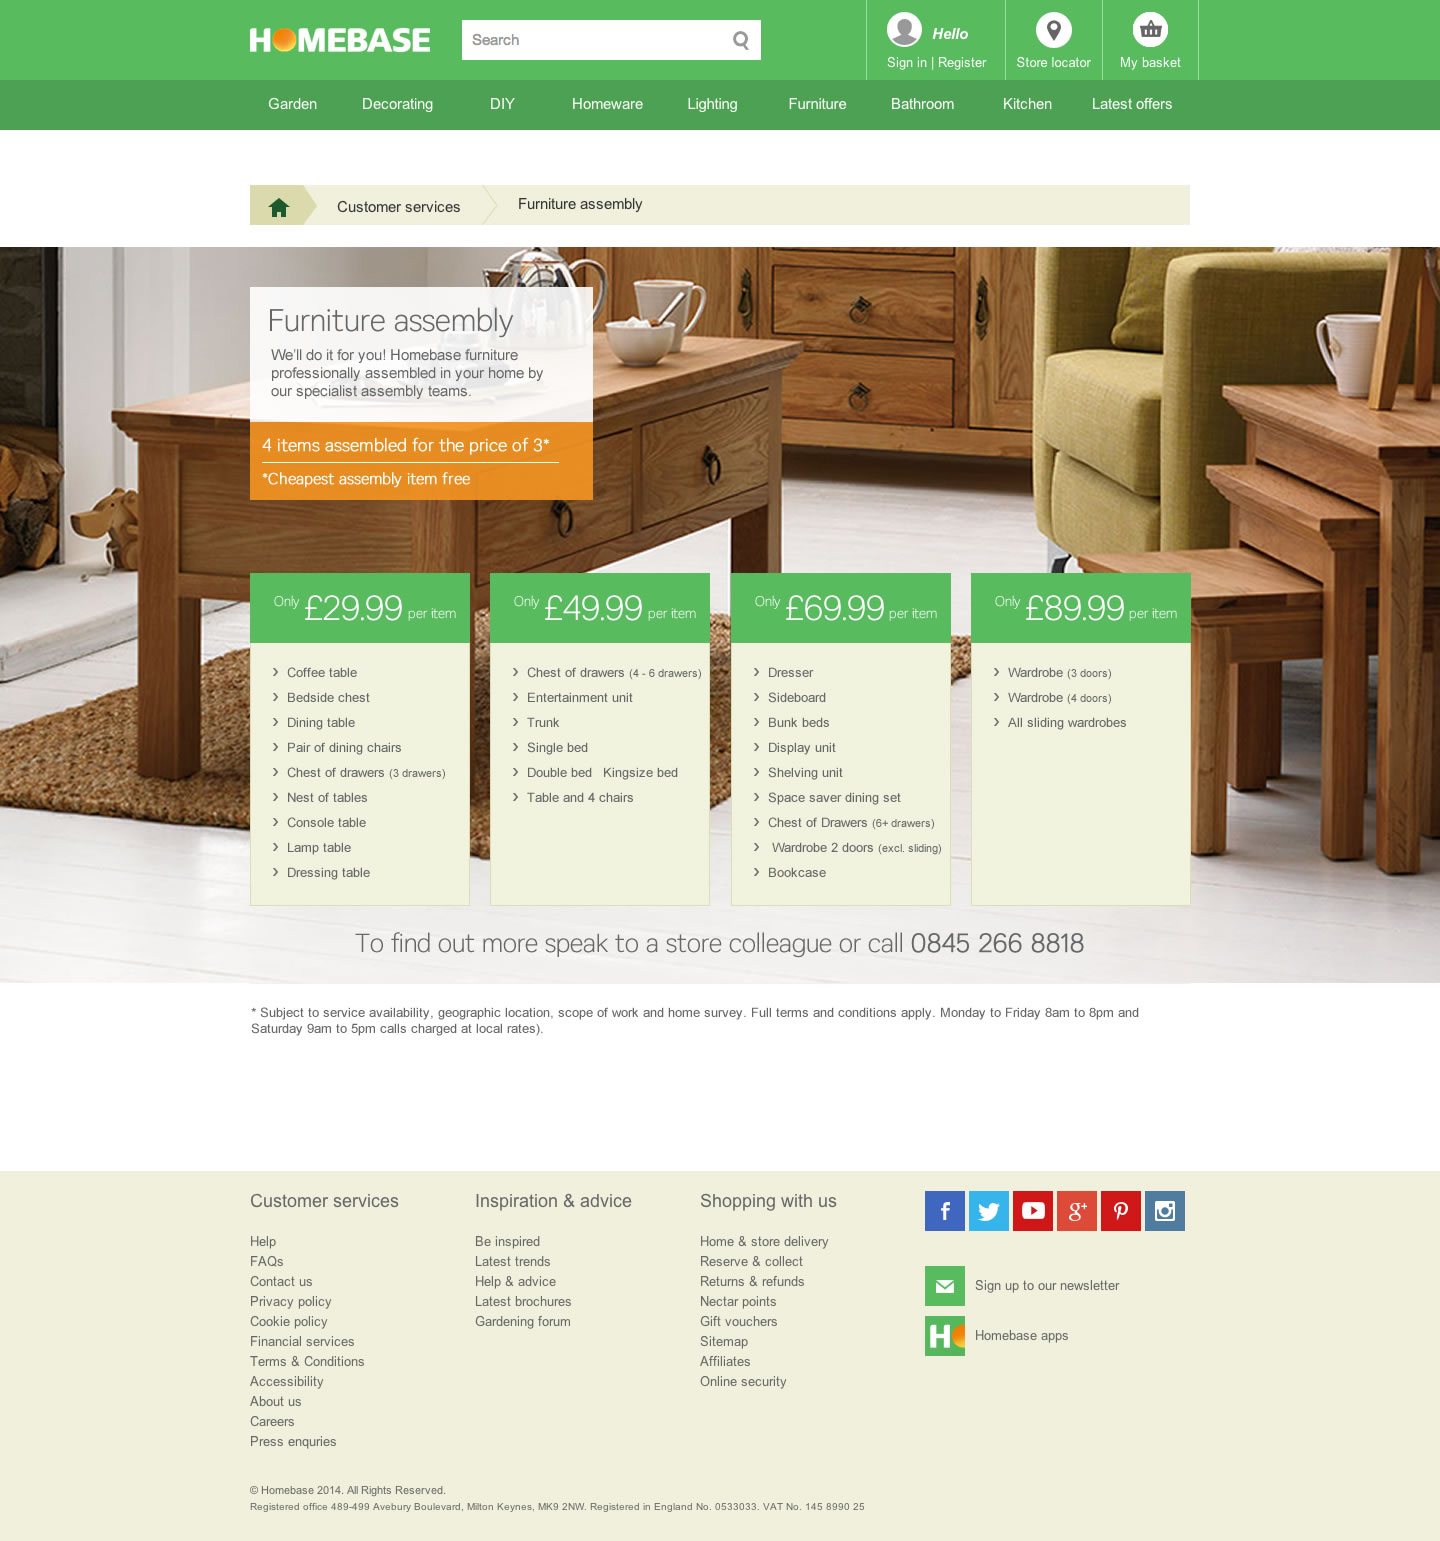 Furniture Assembly page